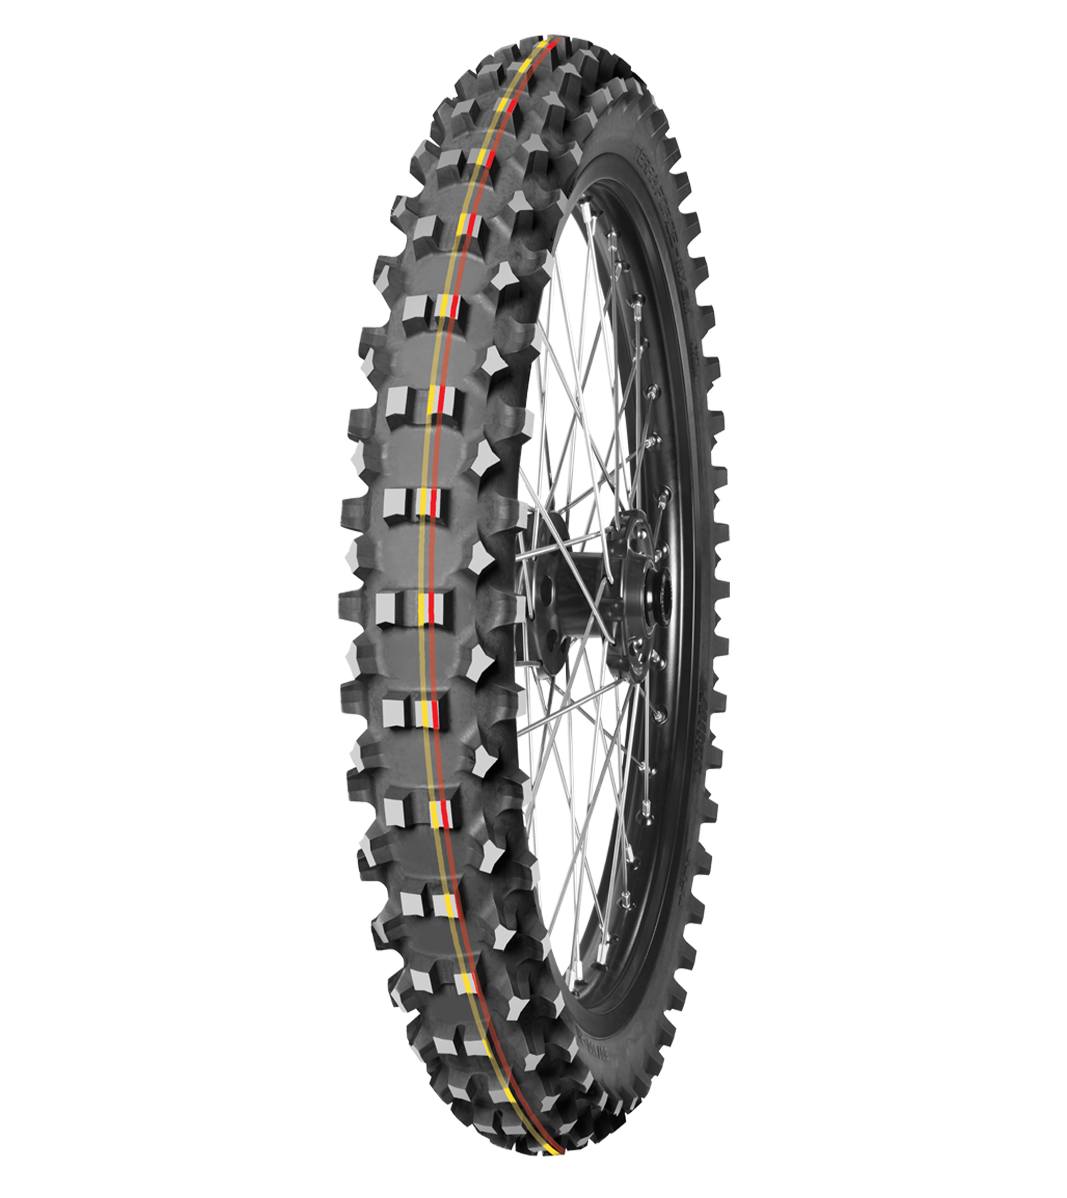 Mitas TERRA FORCE-MX SM 70/100-14 Motocross Competition Off-Road SOFT TO MEDIUM 40M Red & Yellow Tube Front Tire, 226157, 70/100-14, Front, Motocross, Motocross Competition, Off-Road, Terra Force, Terra Force-MX SM, Trail, Tires - Imported and distributed in North & South America by Lindeco Genuine Powersports - Premier Powersports Equipment and Accessories for Motorcycle Enthusiasts, Professional Riders and Dealers.